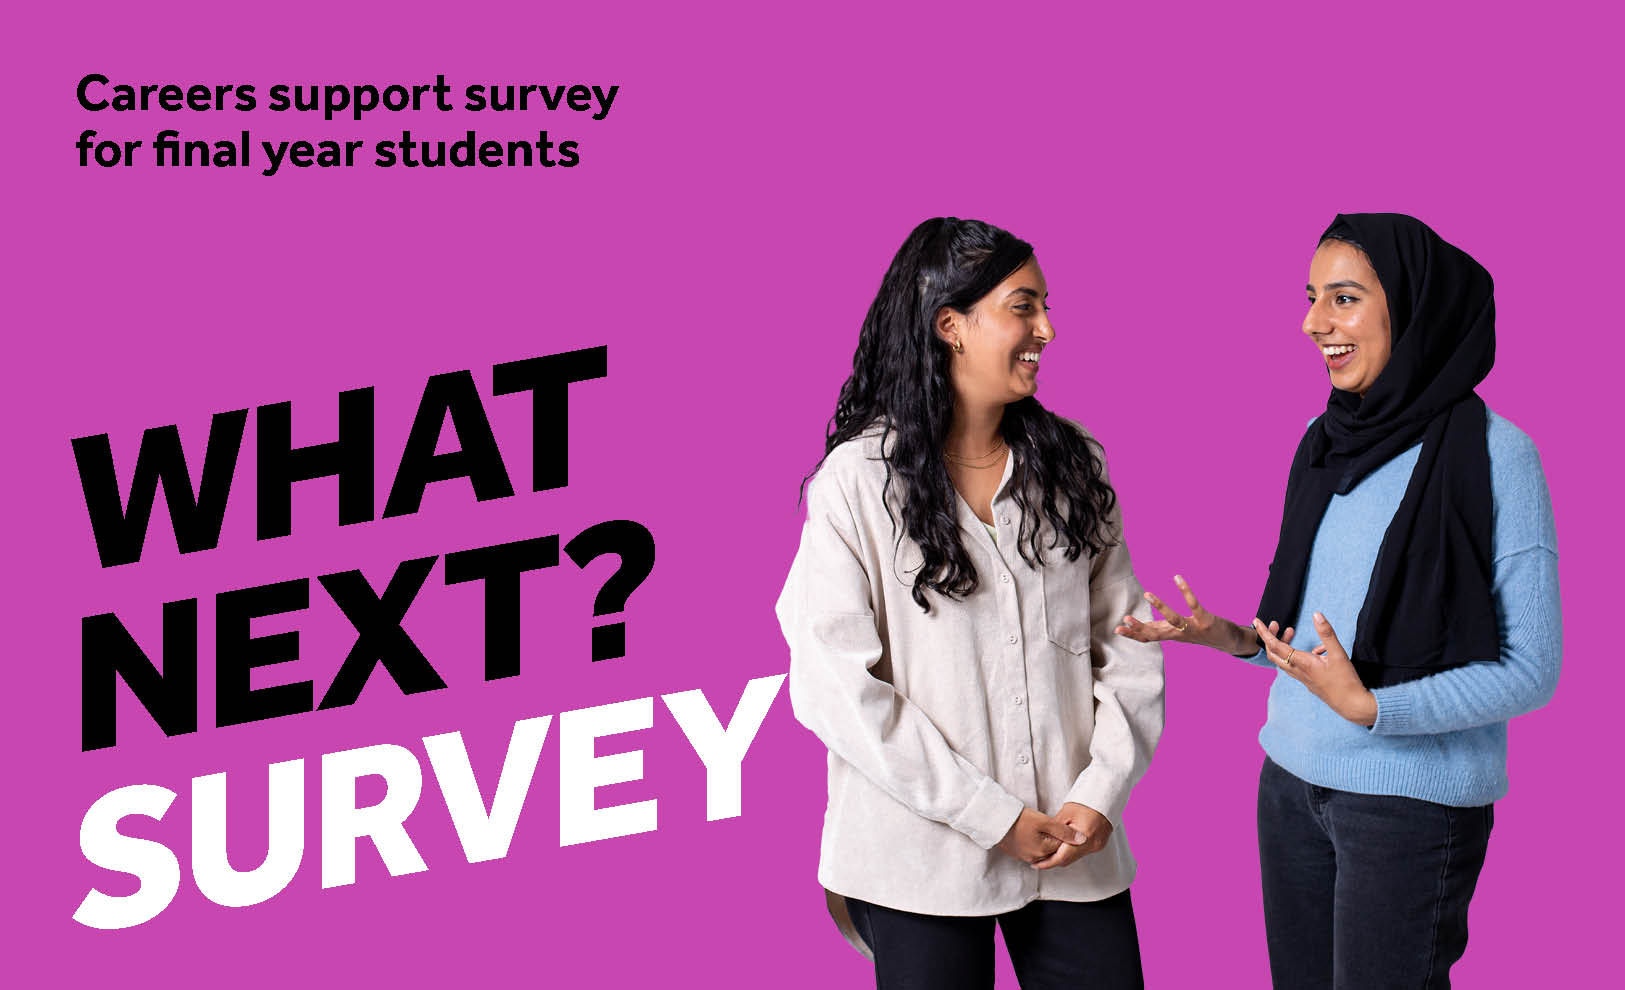 Pink background with an image of two students hanging out together. Text reads: Careers support survey for final year students.